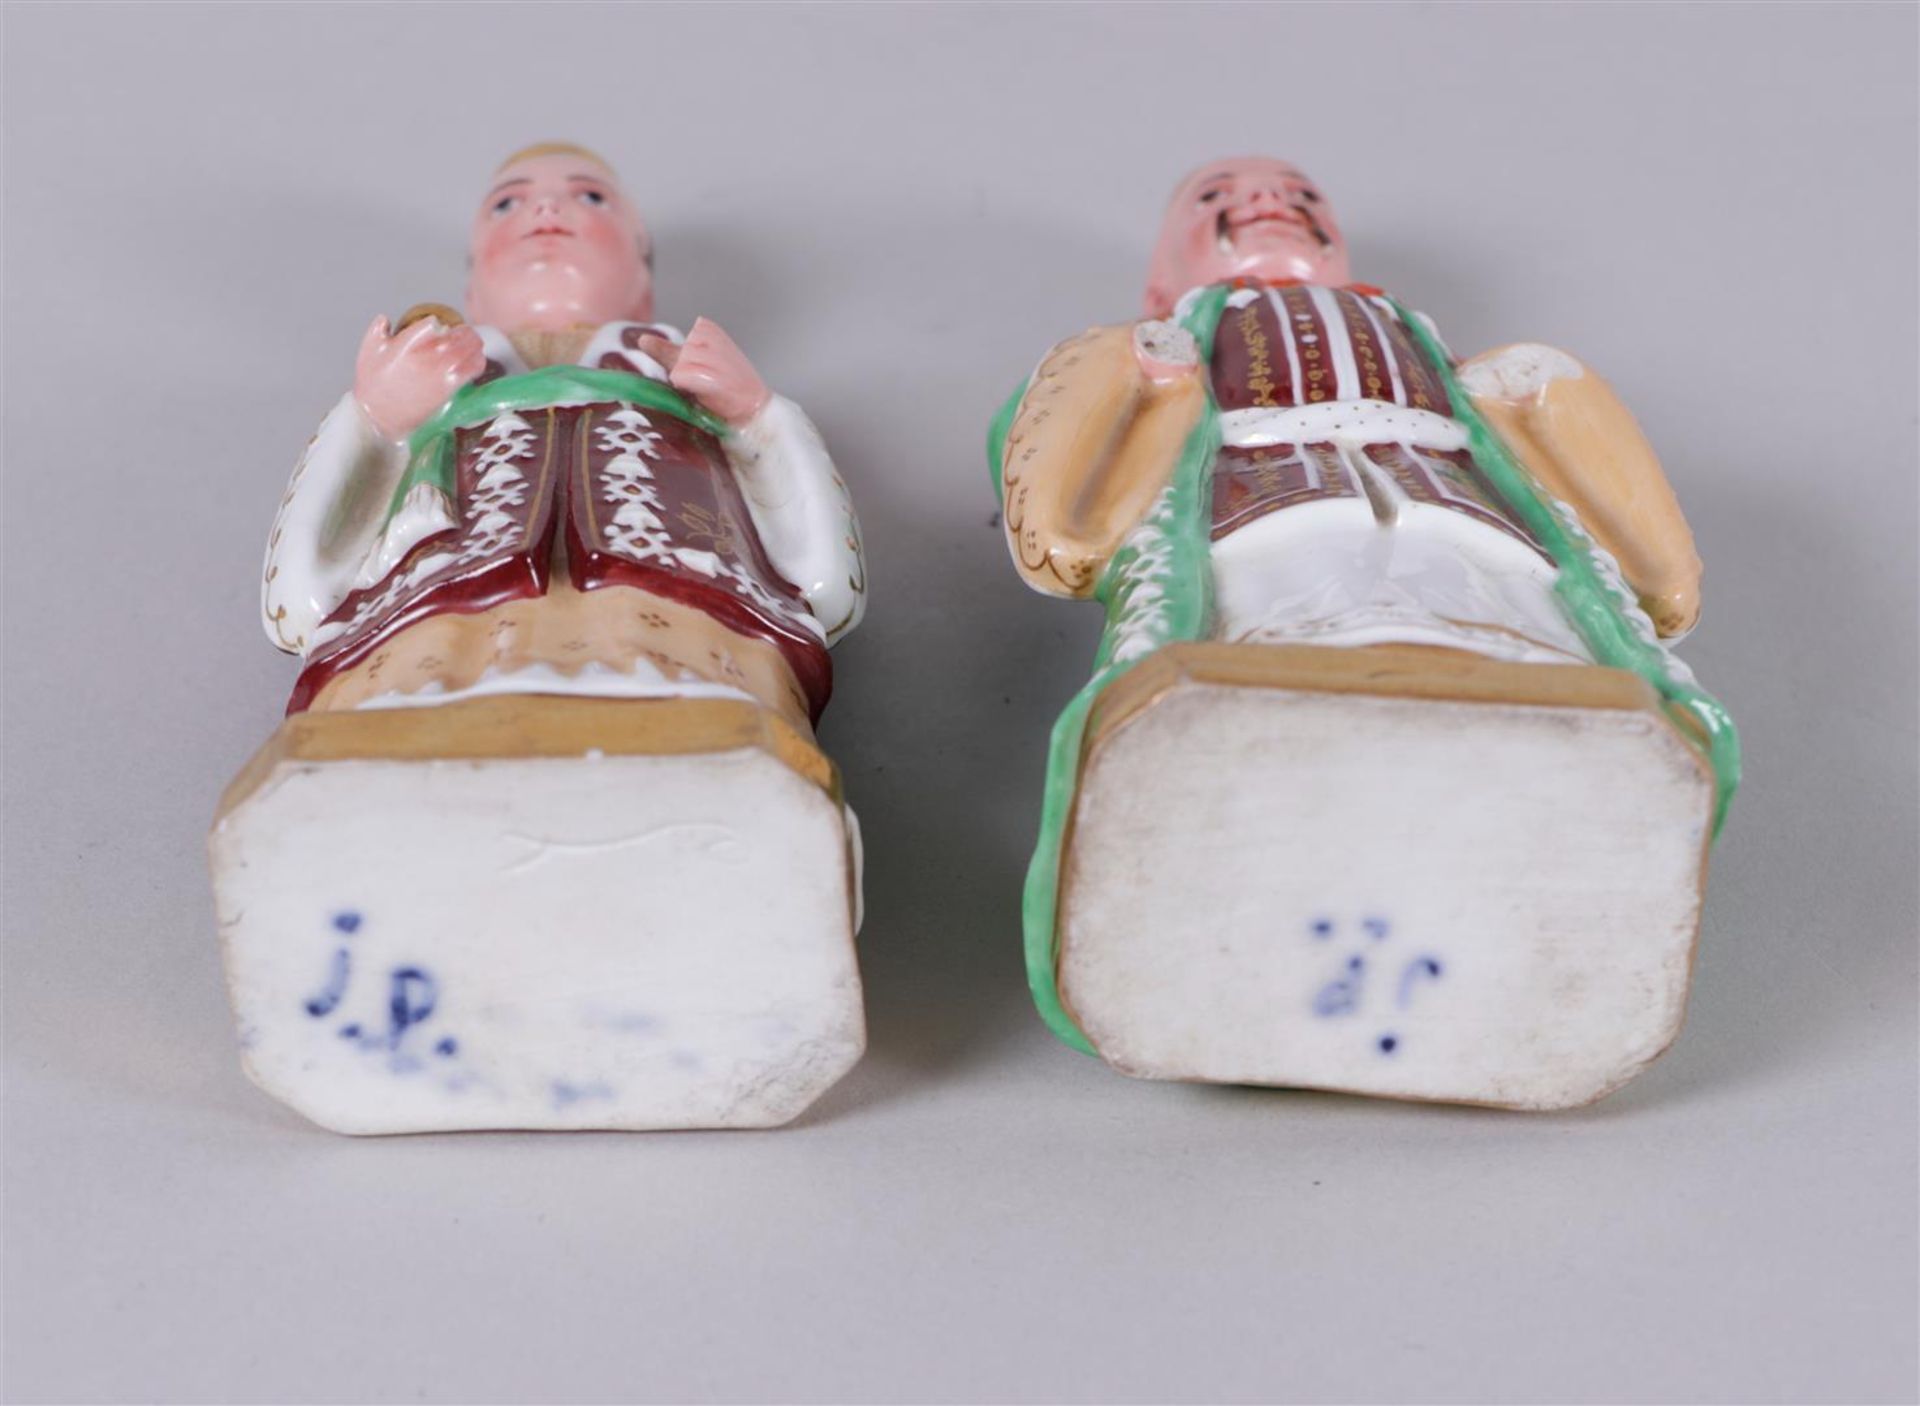 Two porcelain figures in costume, marked JP. Jacob Petit, 19th century.
H. 18 cm. - Image 2 of 3